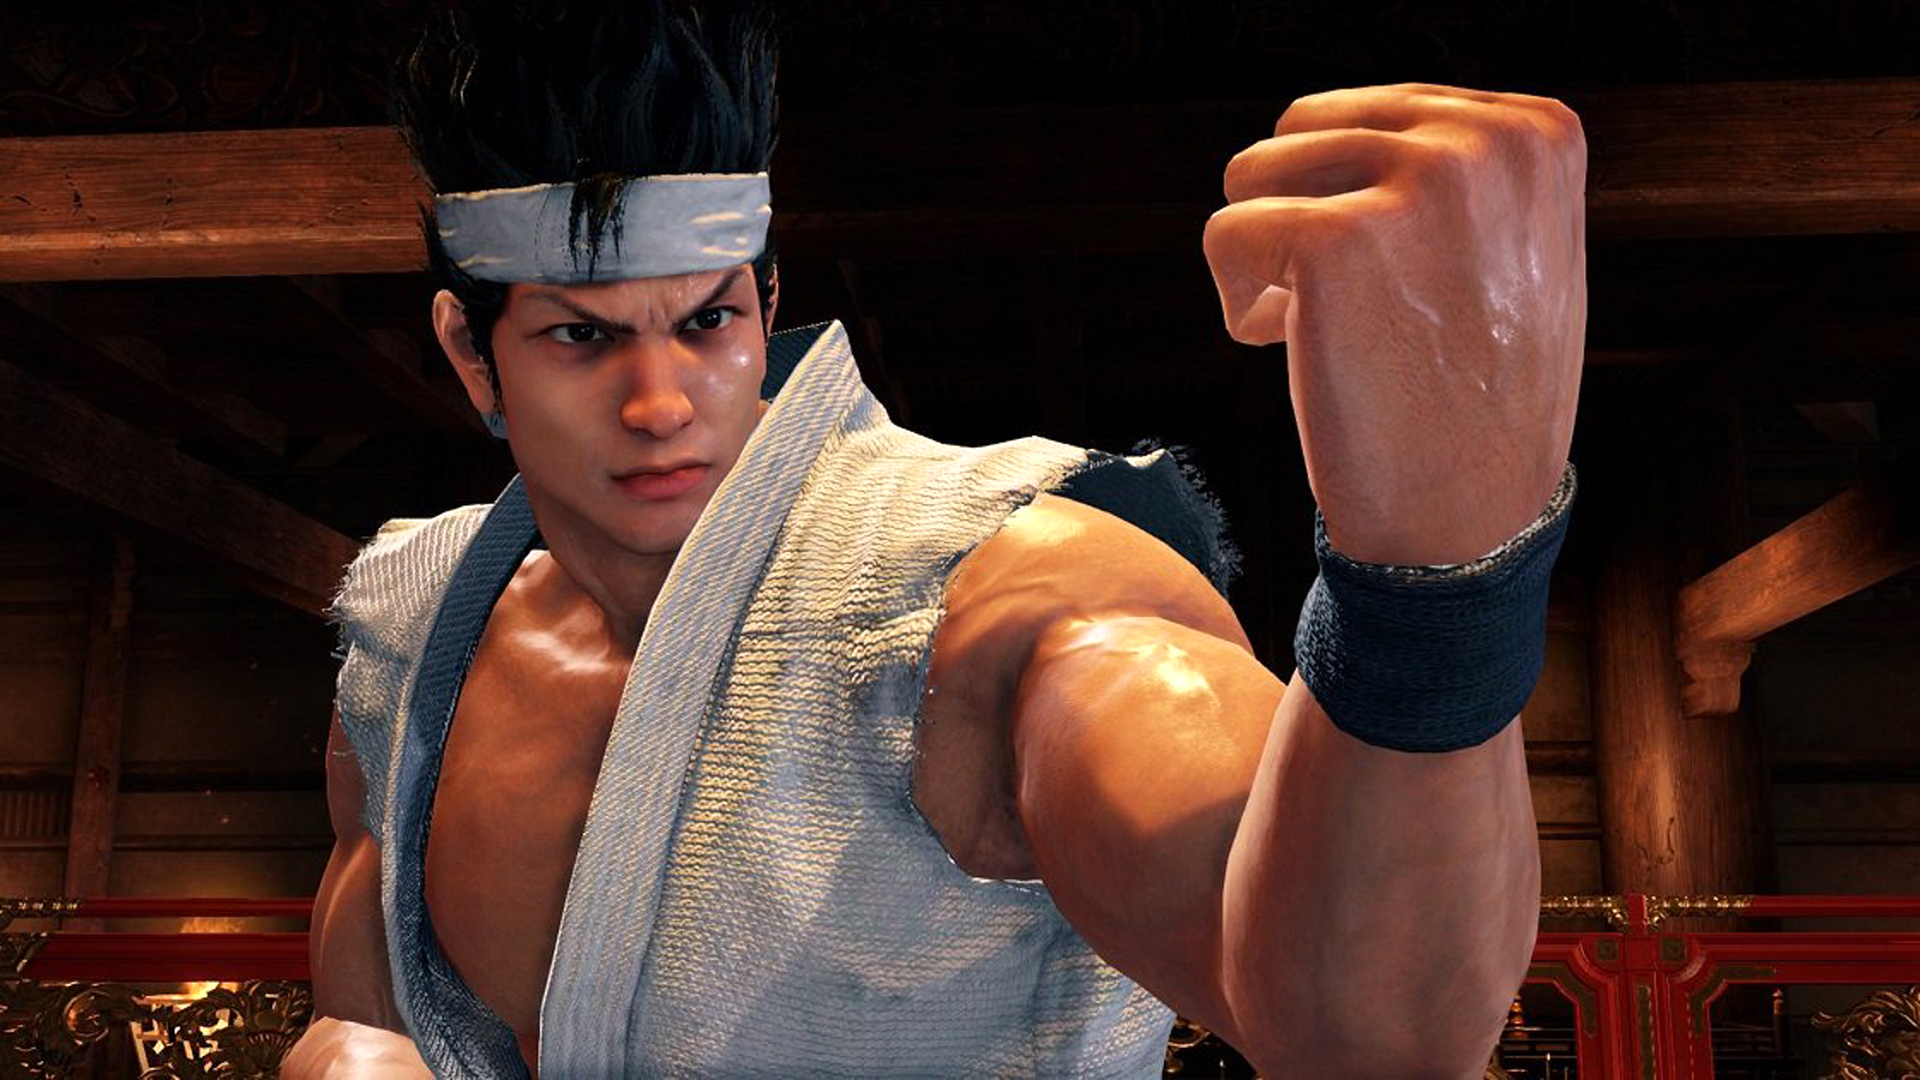 Virtua Fighter 5 PC port is “possible” if they can sort out crossplay